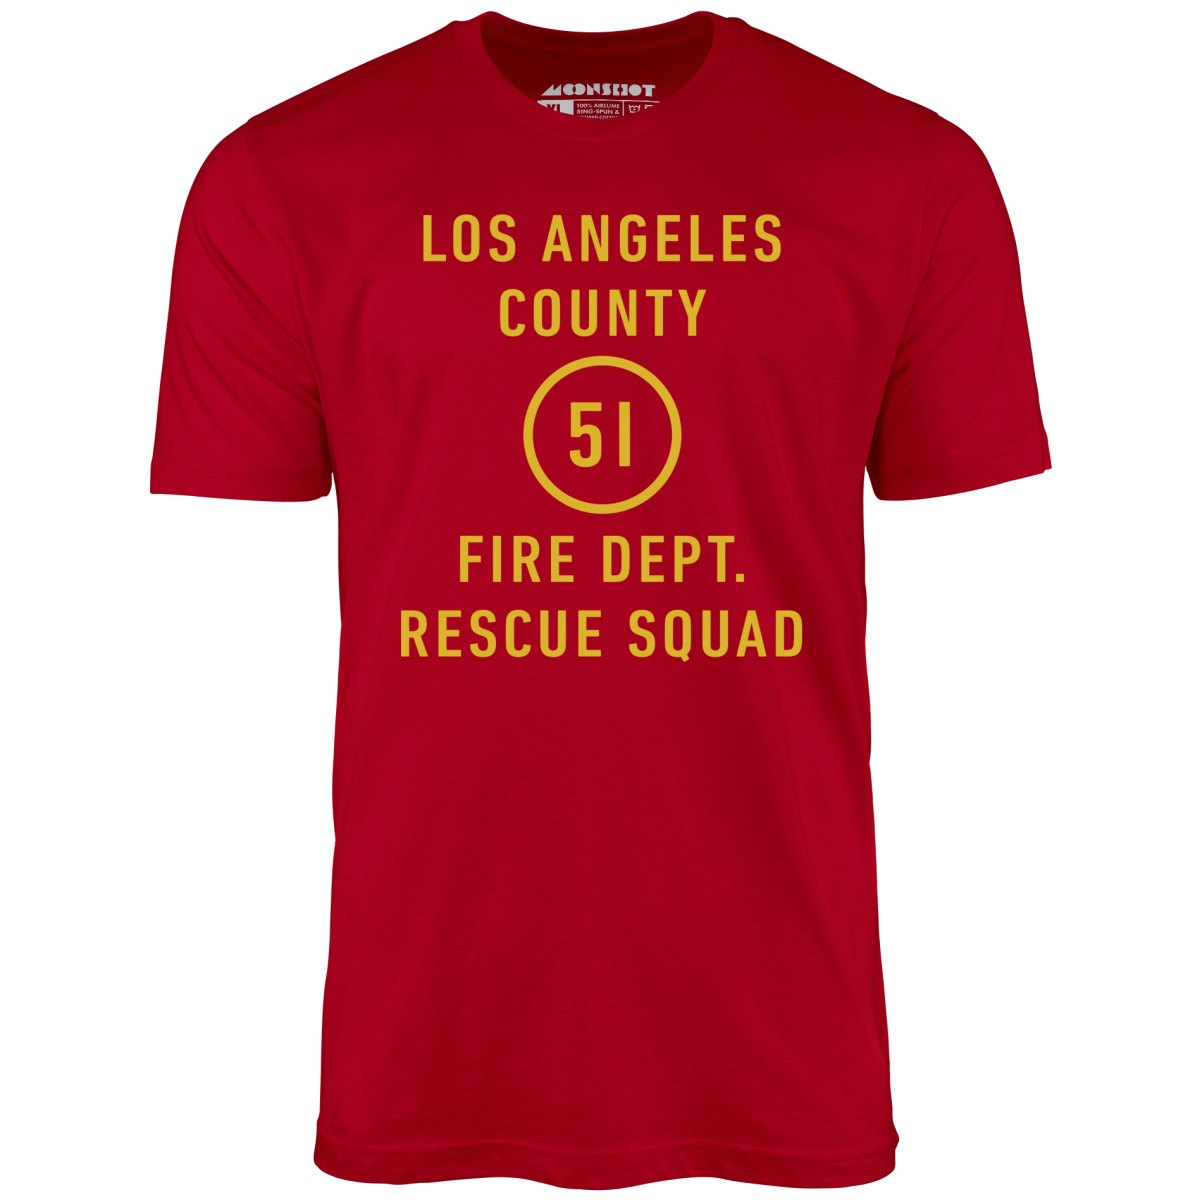 Emergency - Los Angeles County Fire Dept. Squad 51 - Unisex T-Shirt